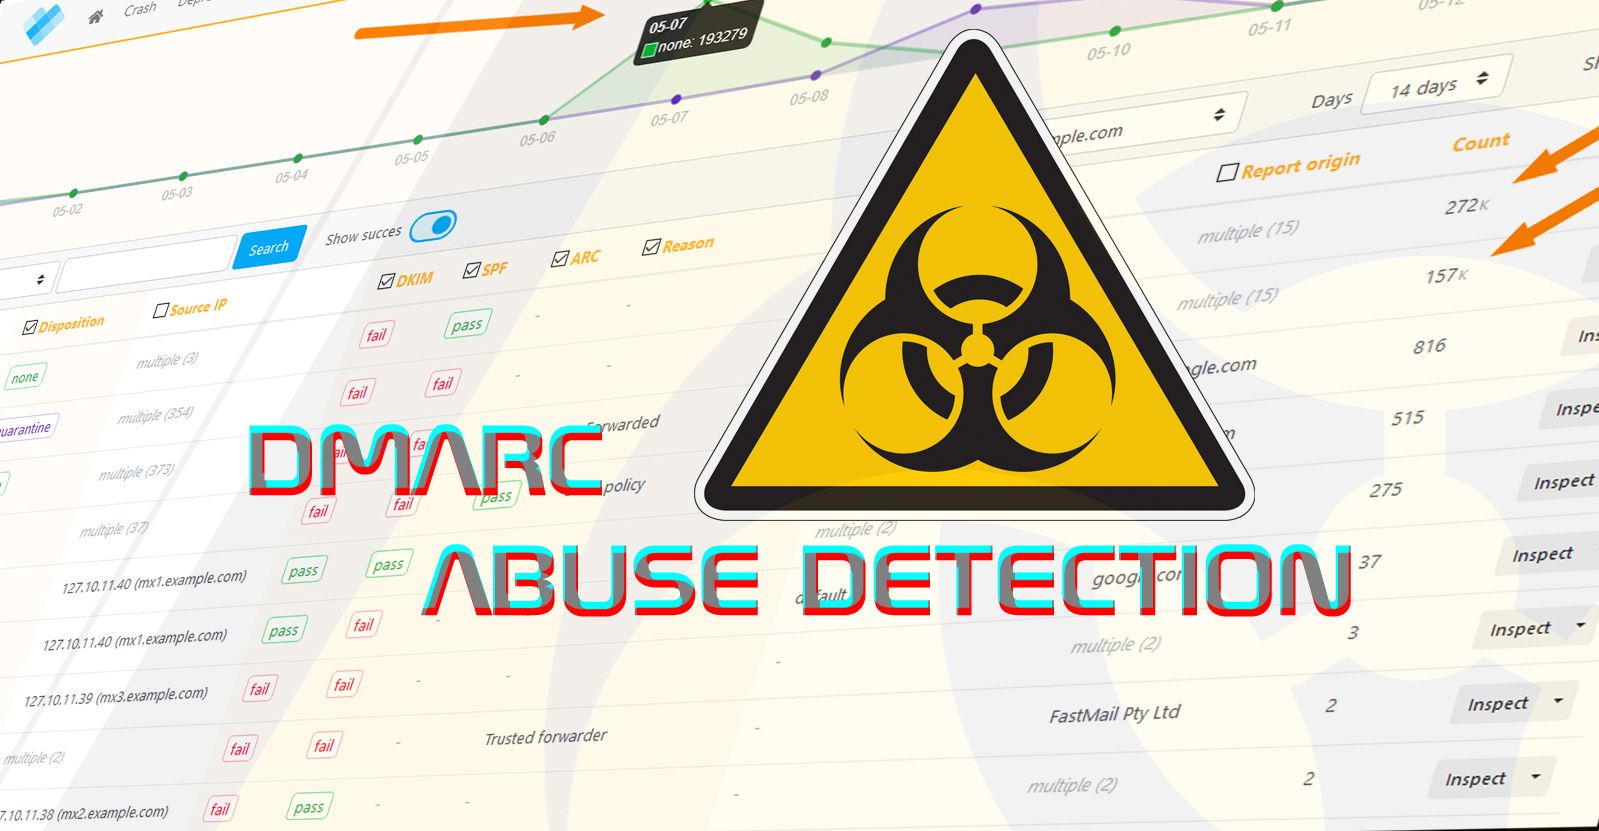 Detect email abuse using DMARC reports